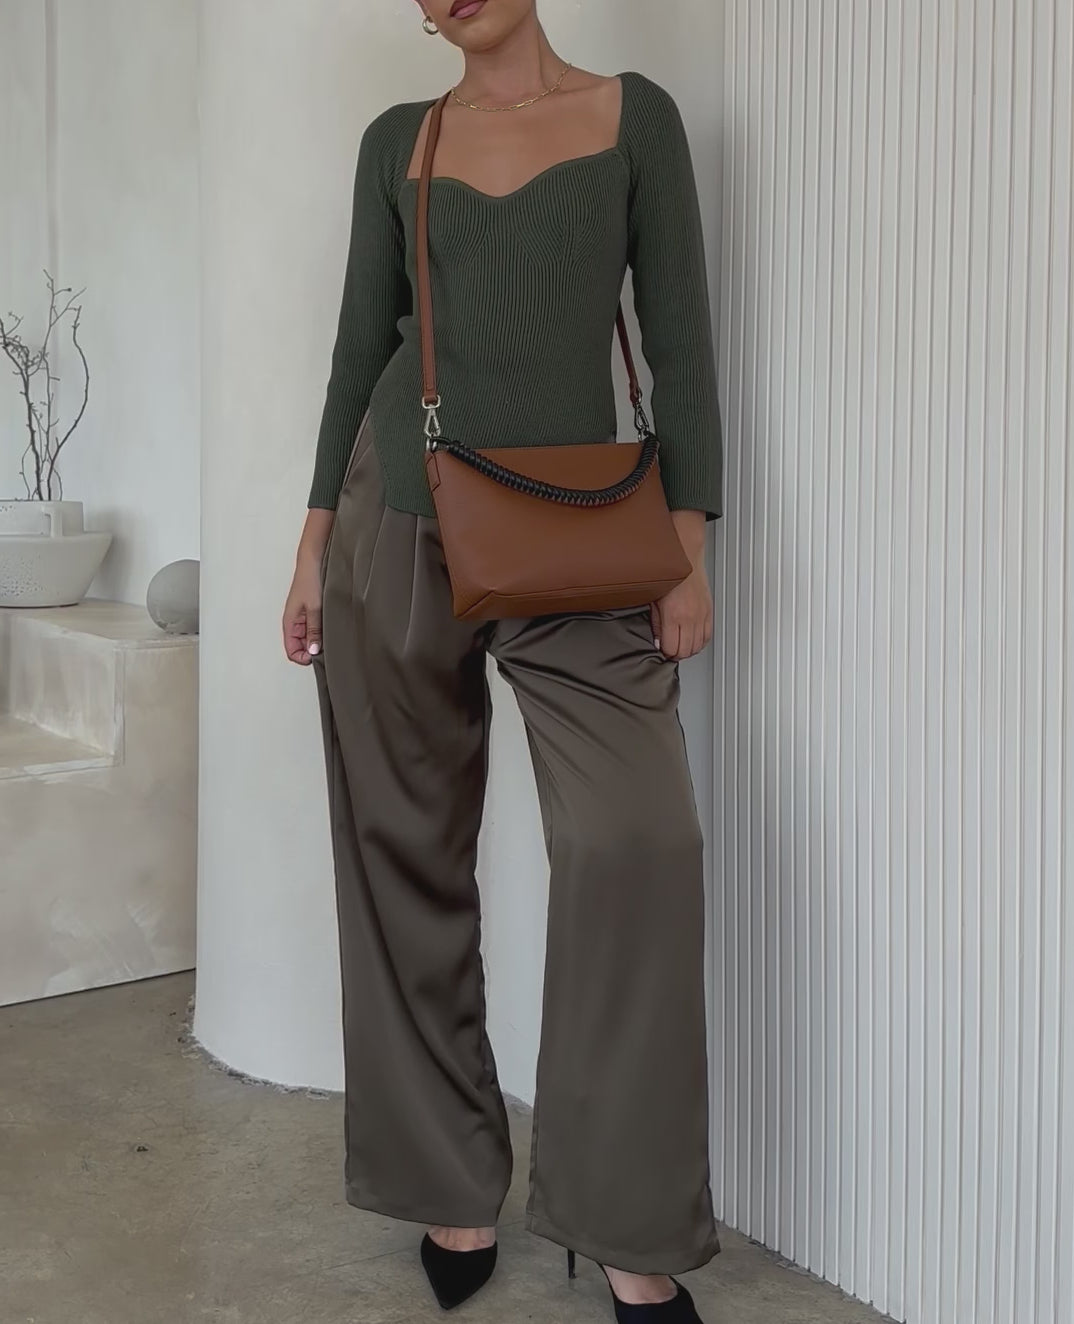 Video of a model wearing a small vegan leather crossbody handbag against a white wall.